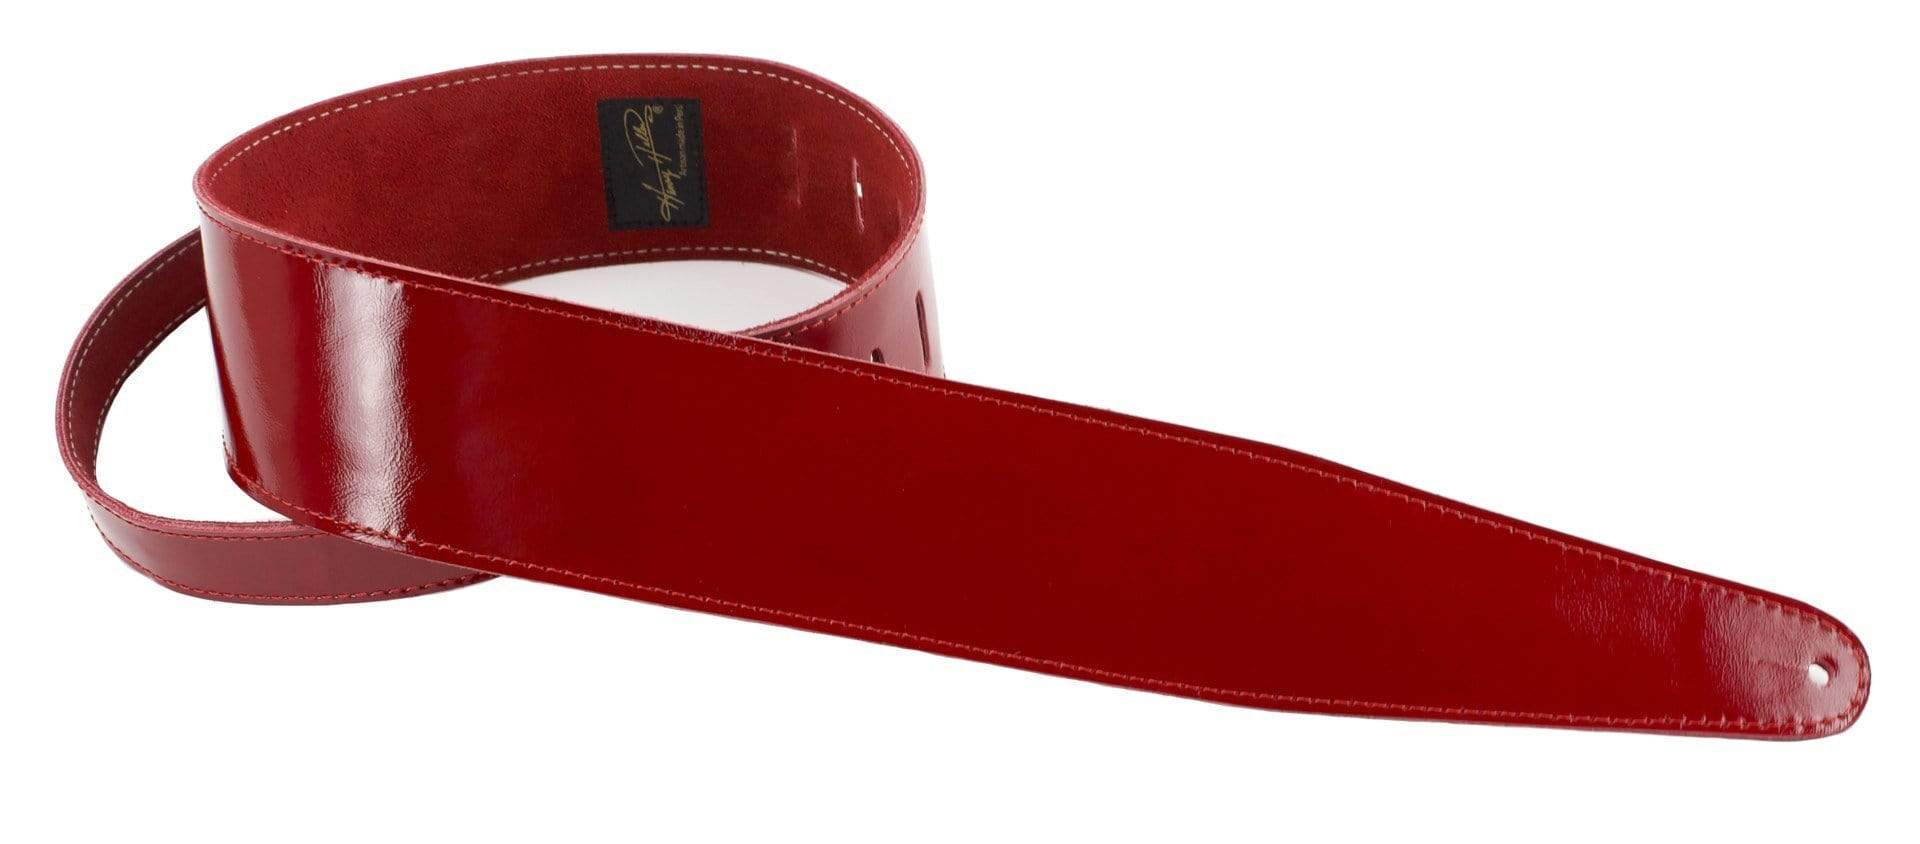 Henry Heller 2.5" Patent Leather Guitar Strap | Red